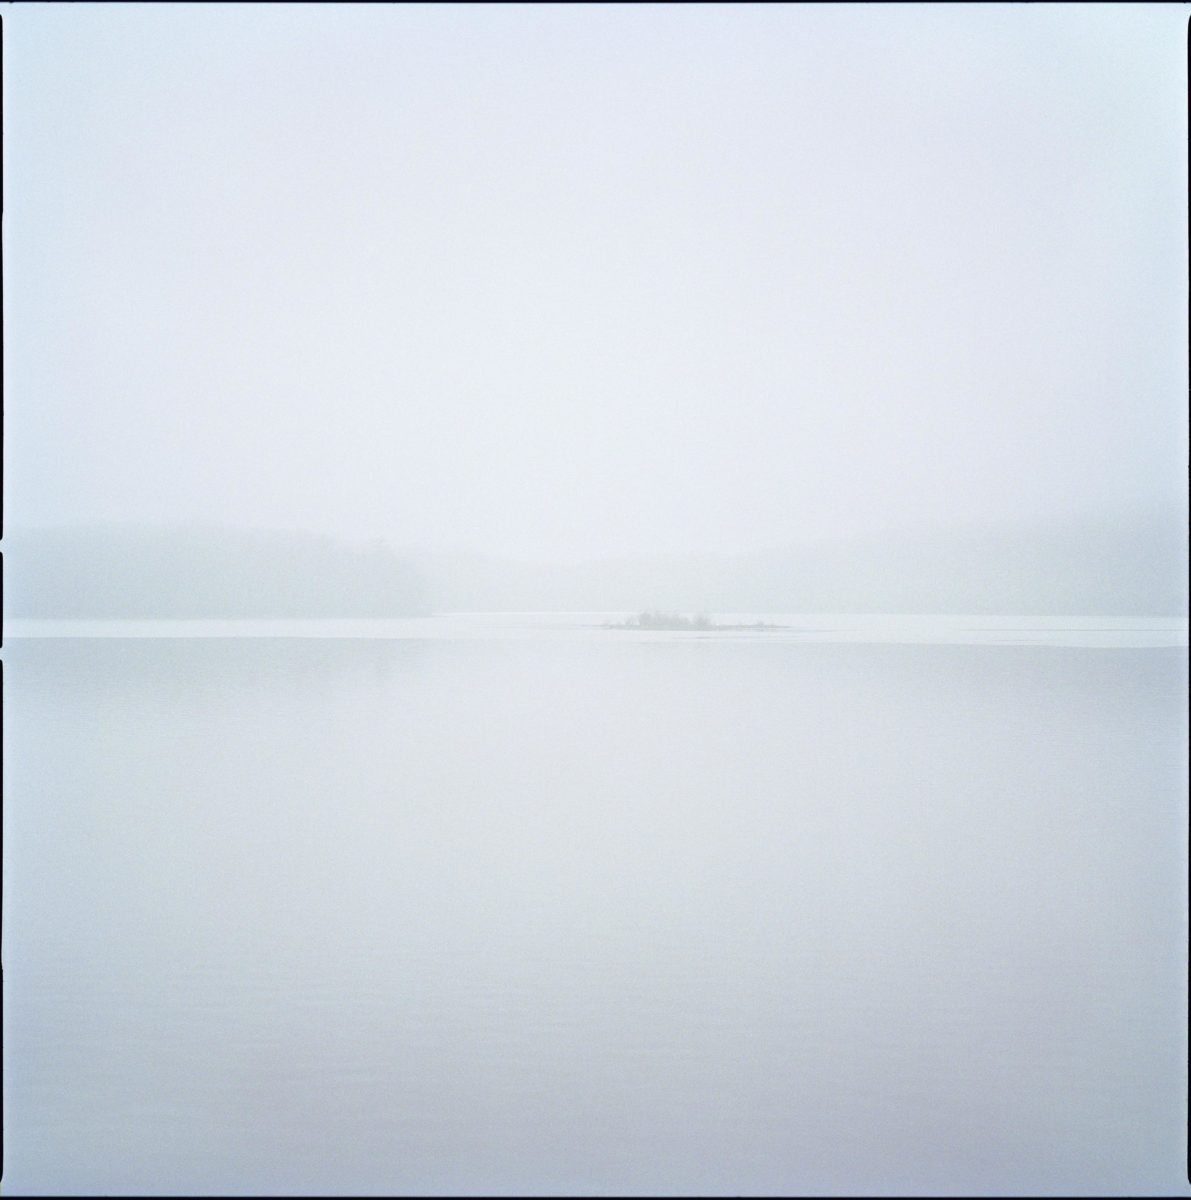 Islands by Nigel Parry from the Landscapes Series, grey and green mist over island in a lake